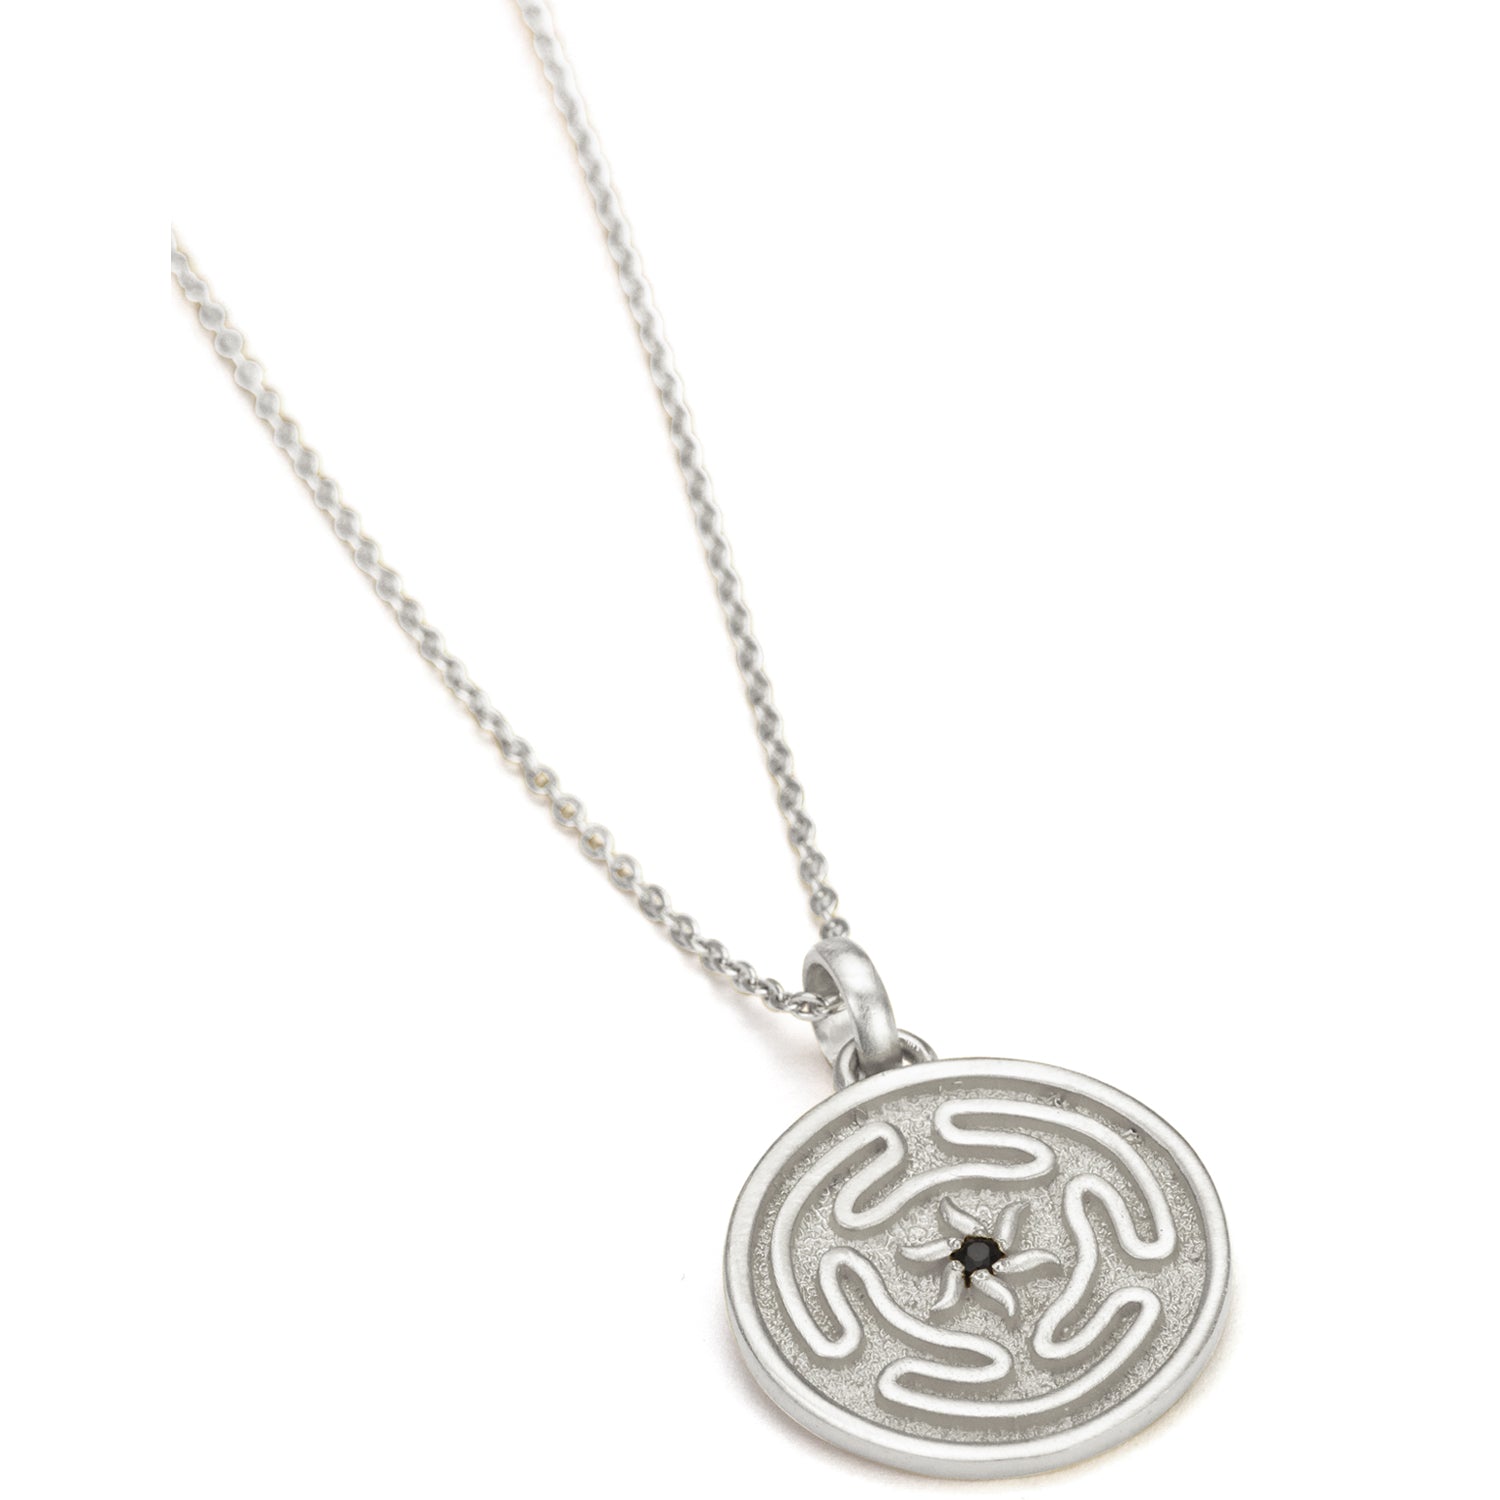 Hecate's wheel pendant with onyx made of high-quality sterling silver